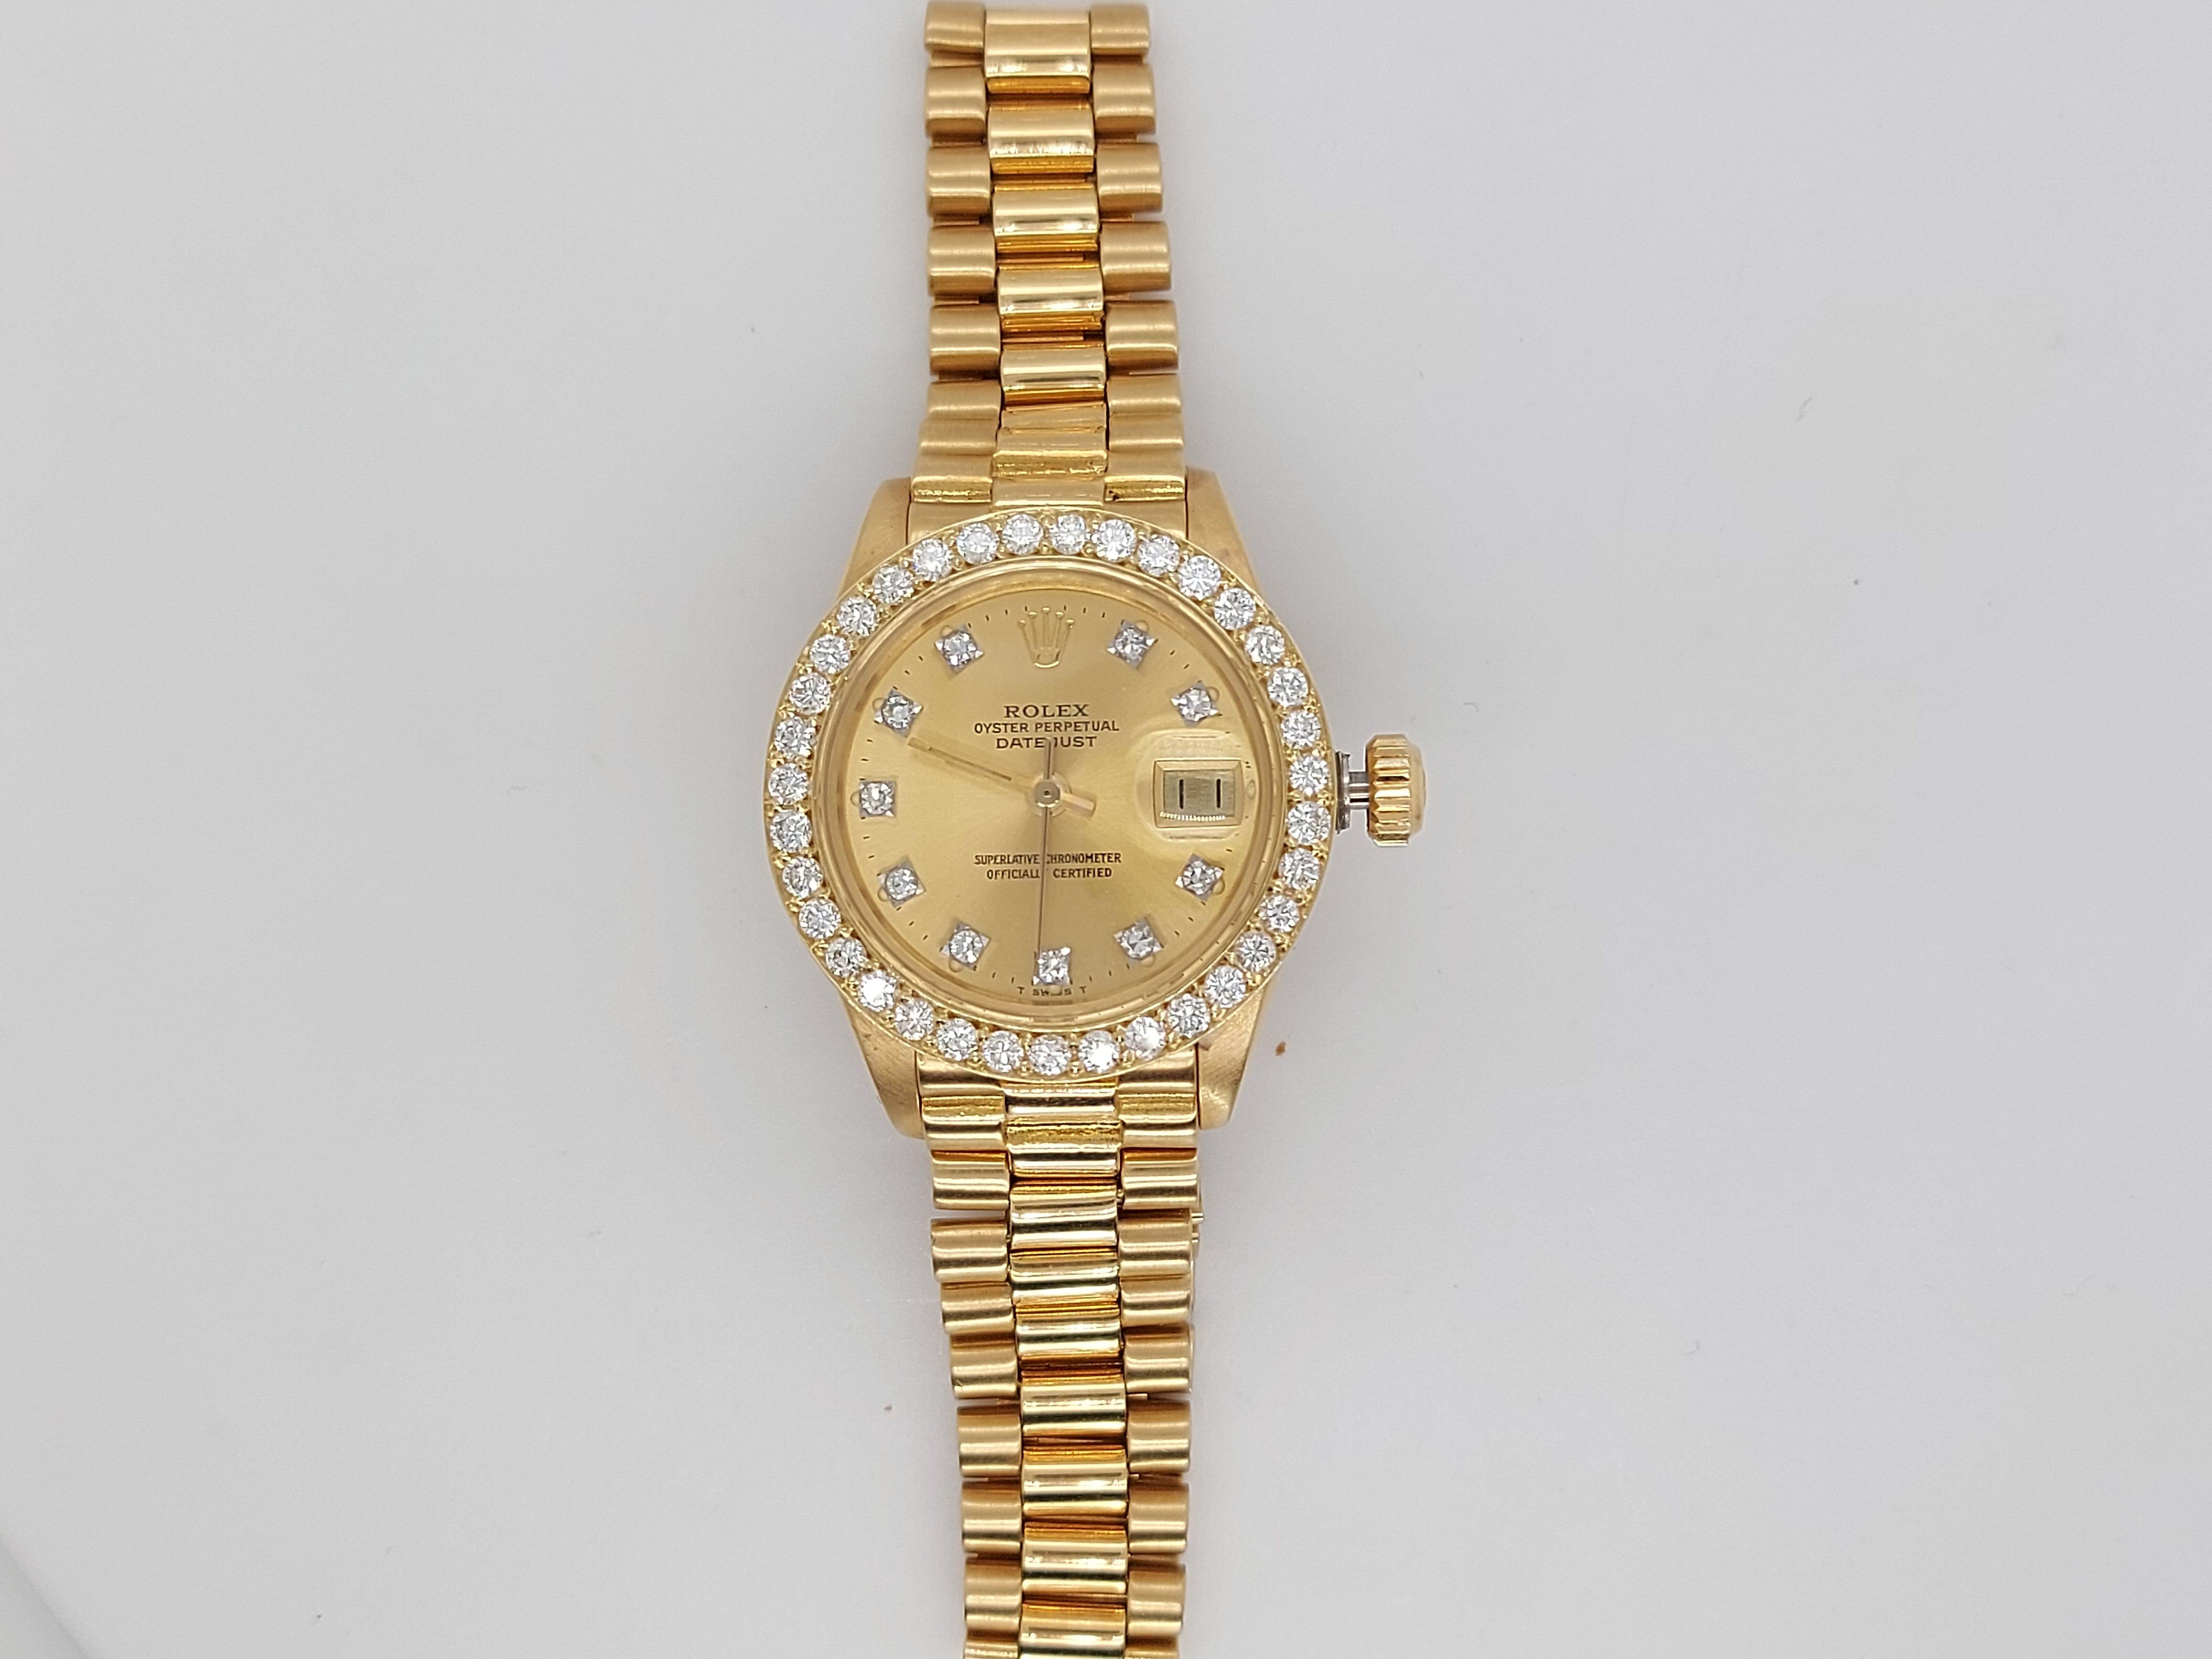 18Kt Yellow Gold, Rolex Ladies - Datejust President  Champagne Dial With Diamonds  in Perfect condition.

Movement: Automatic

Functions: Hours, Minutes, Seconds, Magnified date window by the 3

Case: 18 kt yellow gold,  Diameter 26 mm, thickness